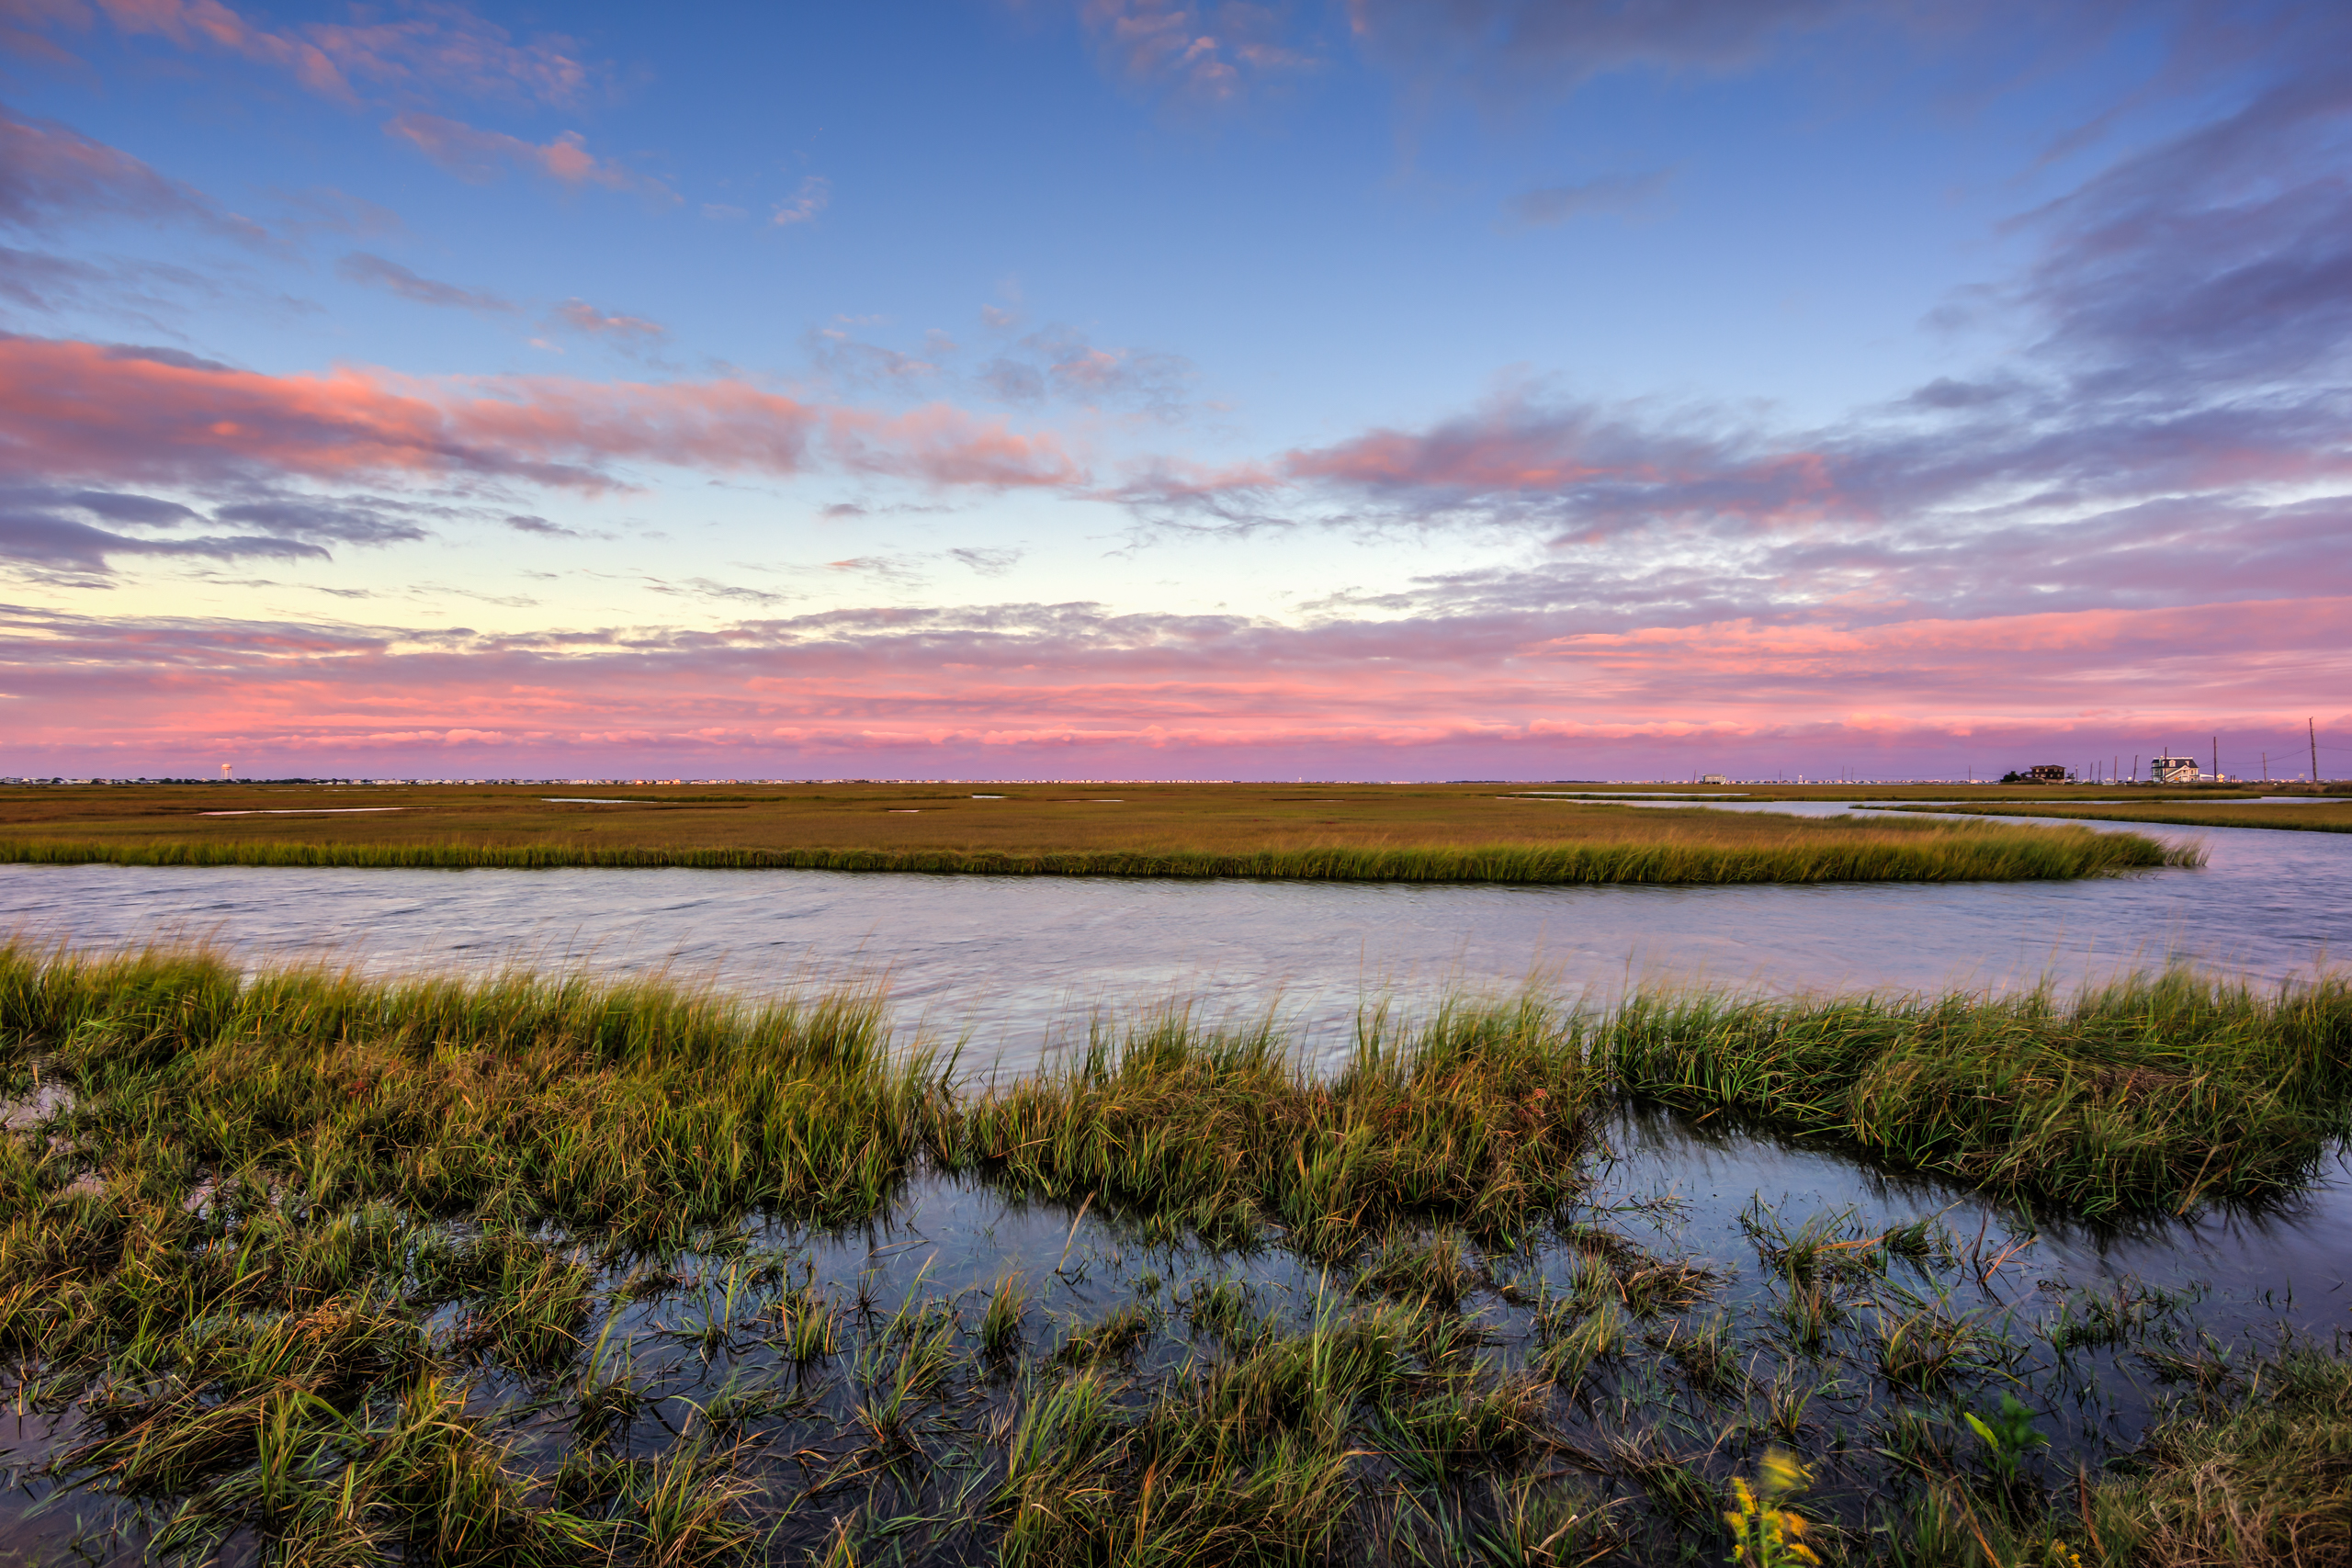 Blue hour photo of pink and purple clouds over marshland.